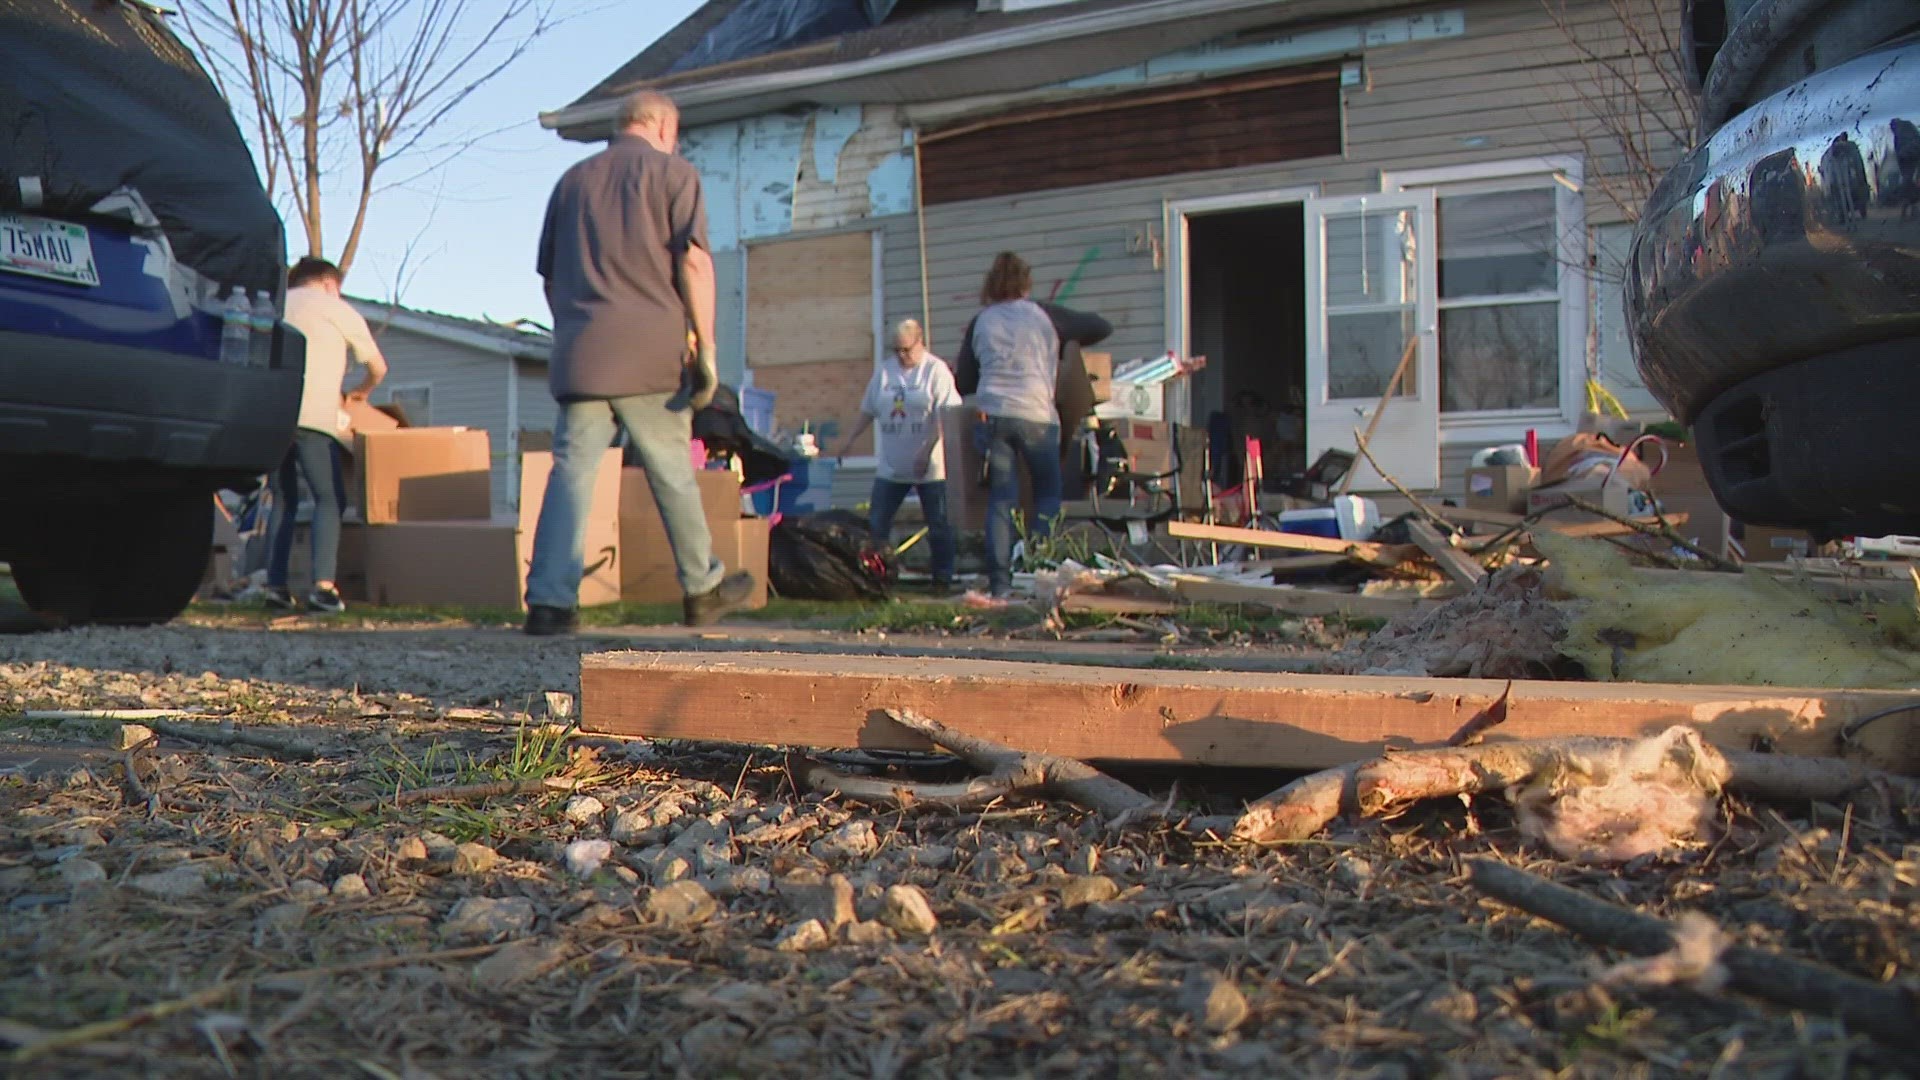 "I didn't think we'd ever have to move again," said one Whiteland resident.